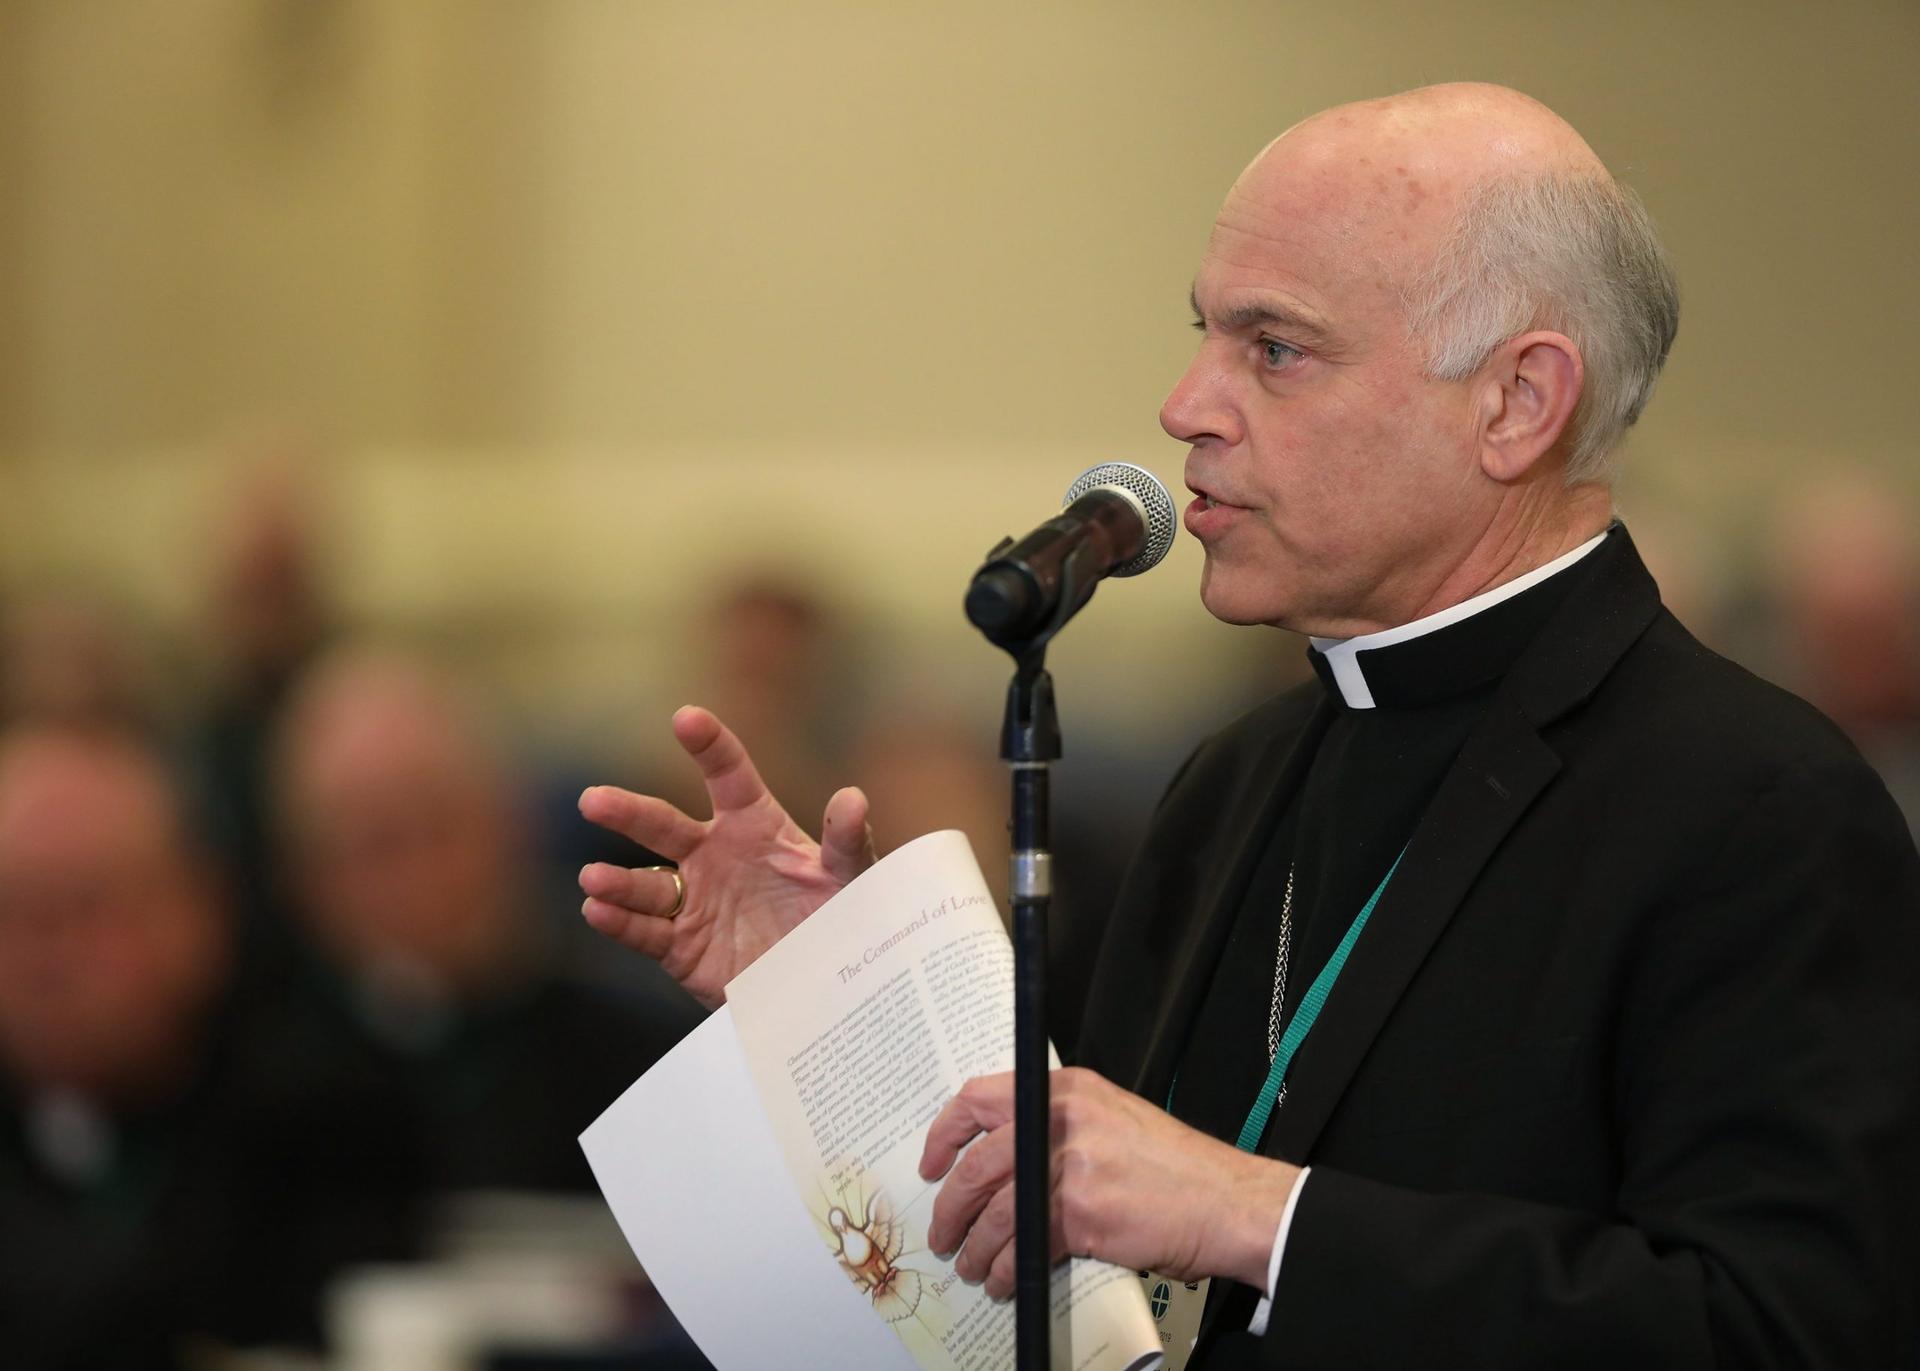 Archbishop Cordileone says no Catholic ‘in good conscience’ can favor abortion